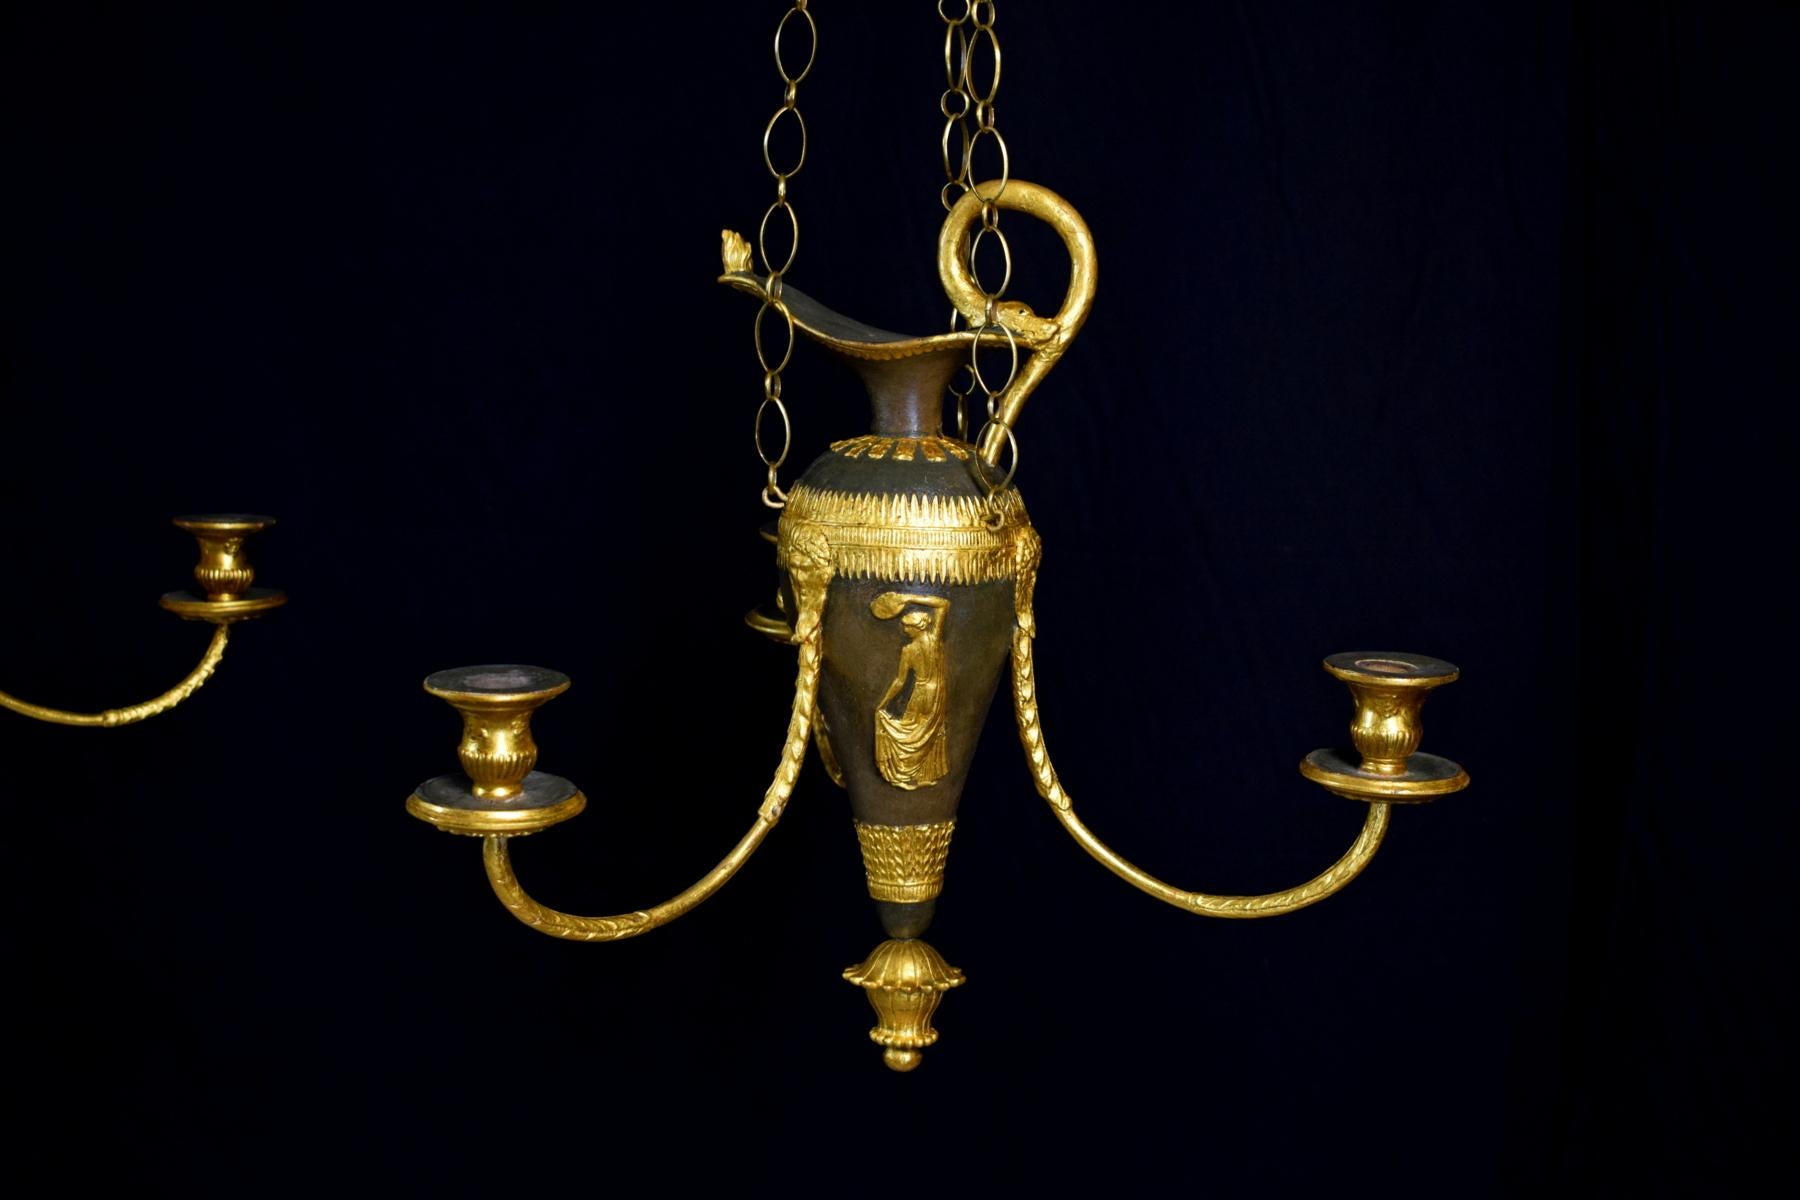 Hand-Carved 18th Century, Pair of Italian Lacquered Wood and Gilded Pastiglia Chandeliers